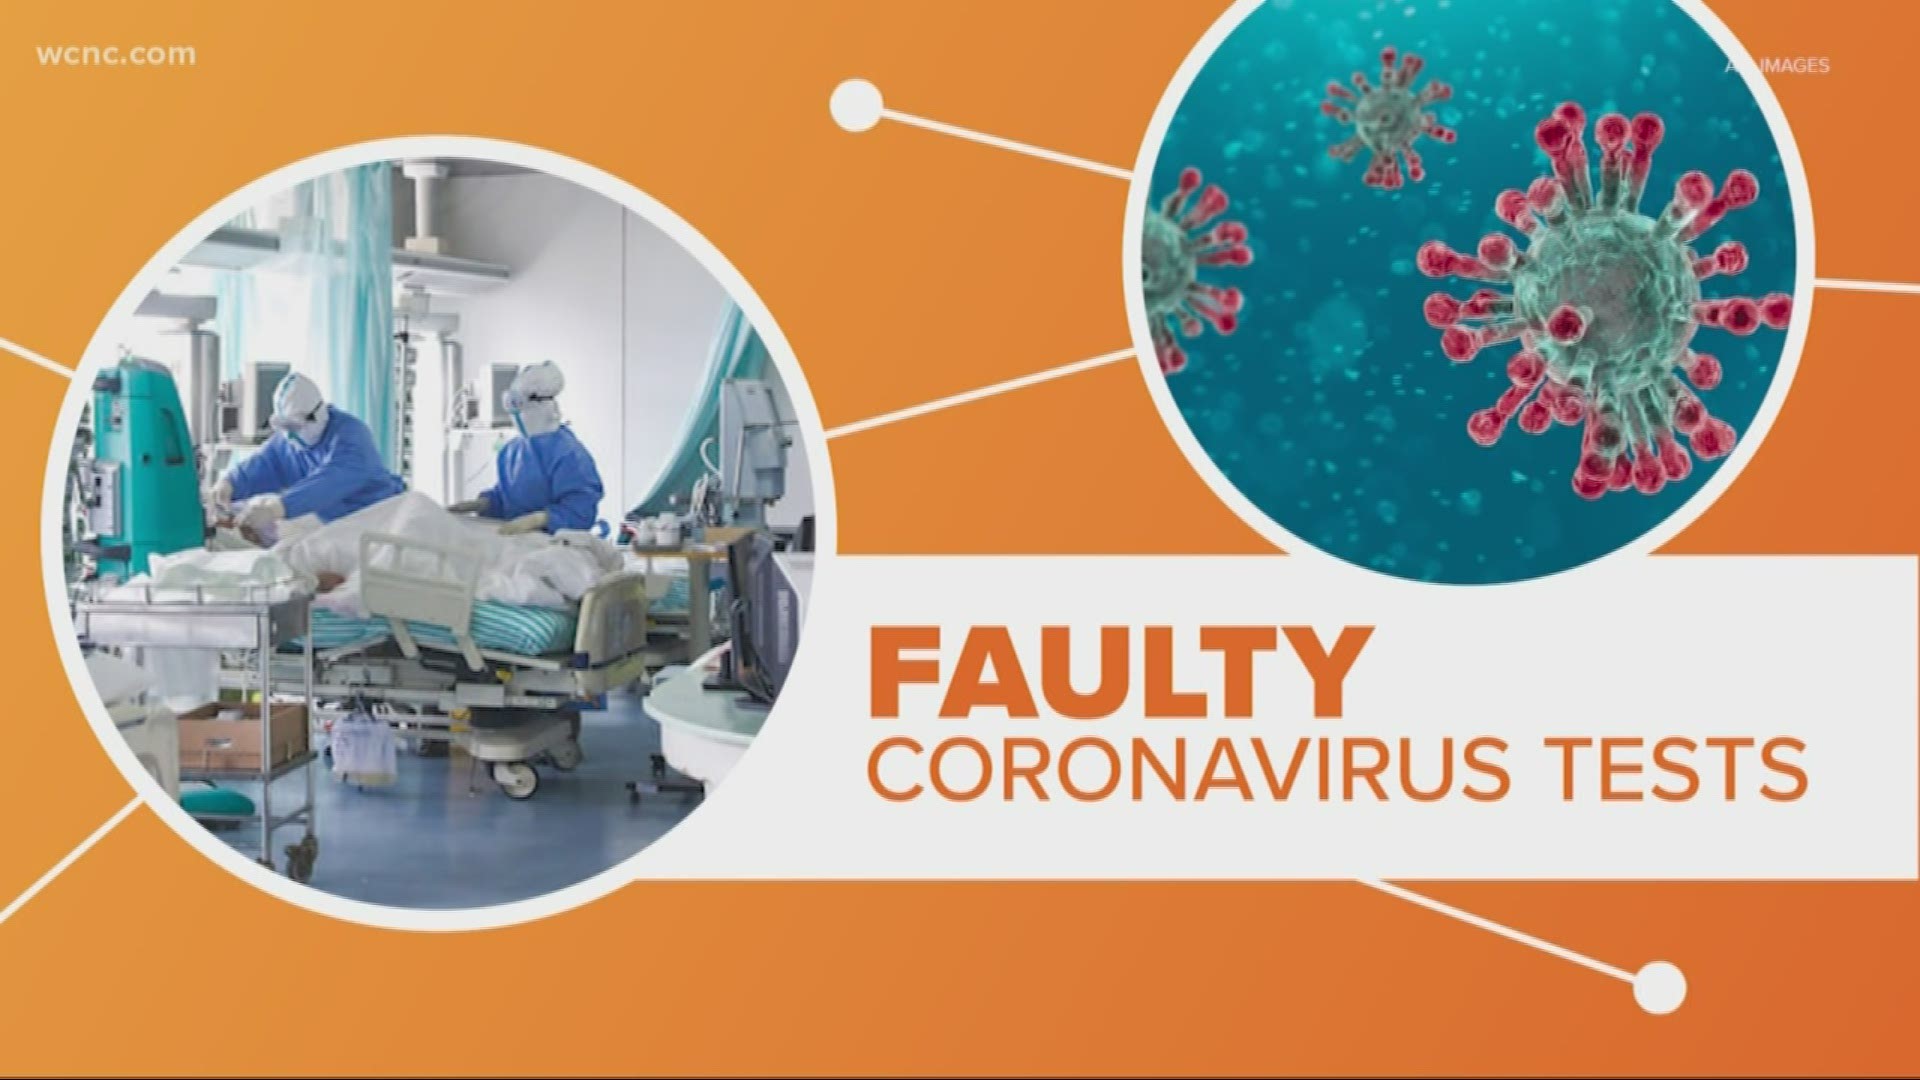 Health officials say Americans should prepare for the spread of the coronavius in the U.S. Containing the virus could be harder because of a hiccup by the CDC.